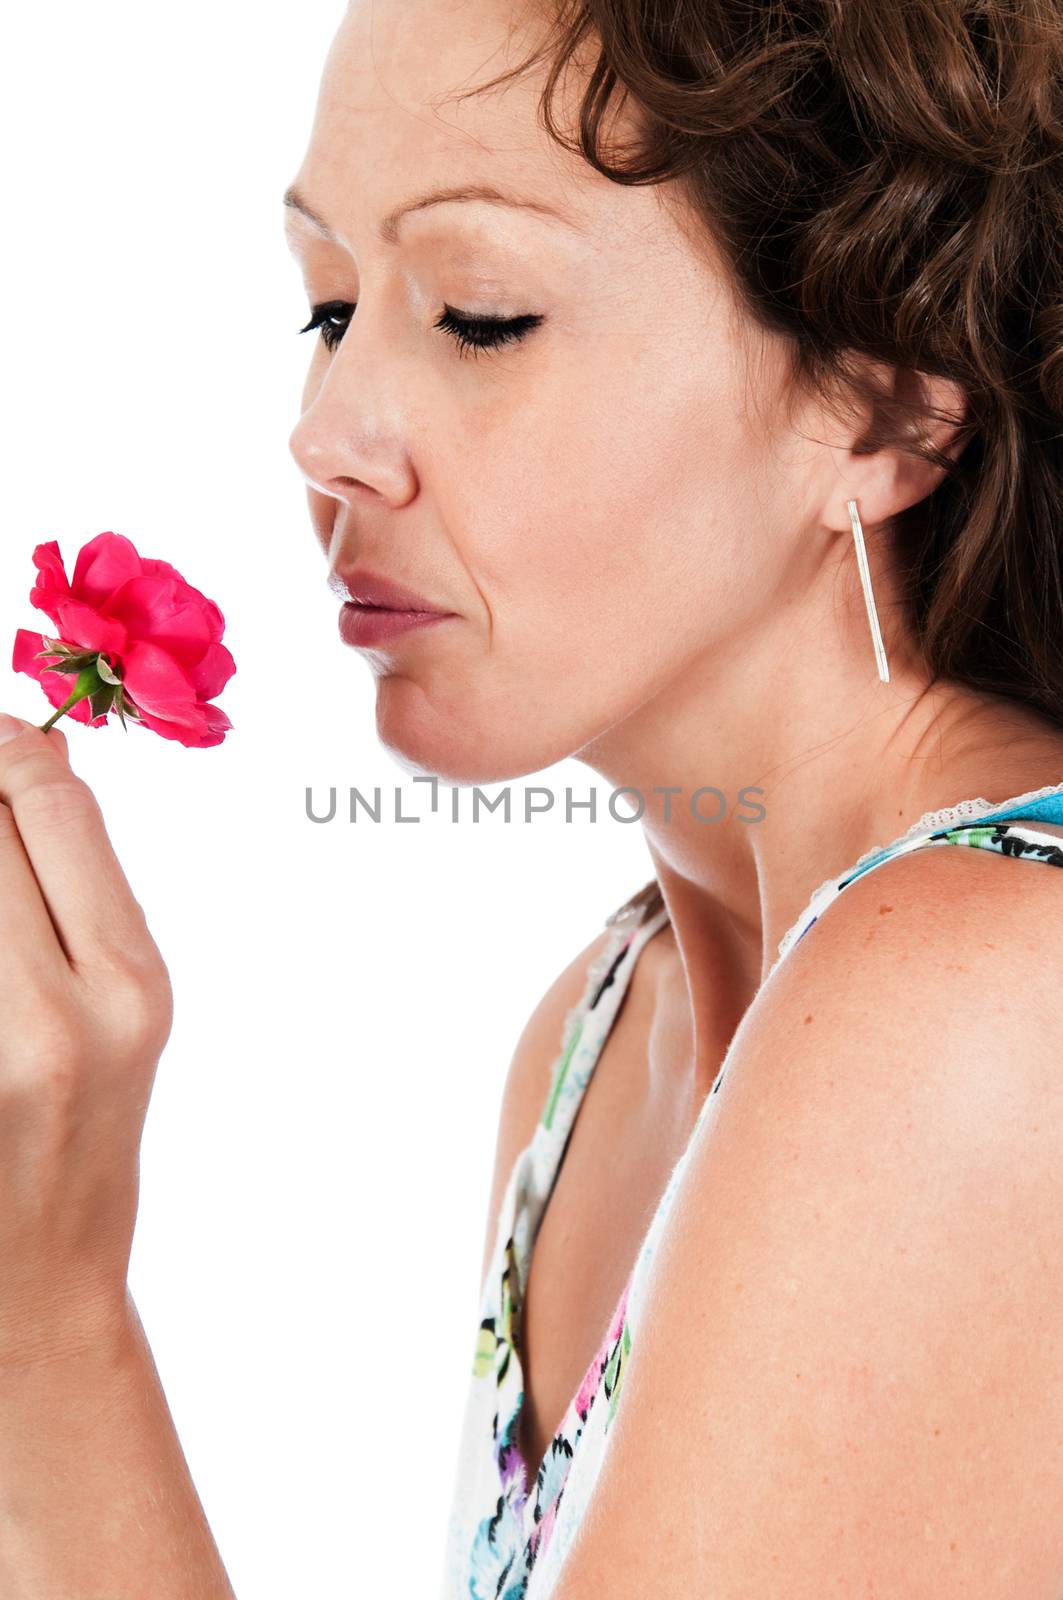 Beautiful young woman enjoying the fragrance of a fresh rose flower.